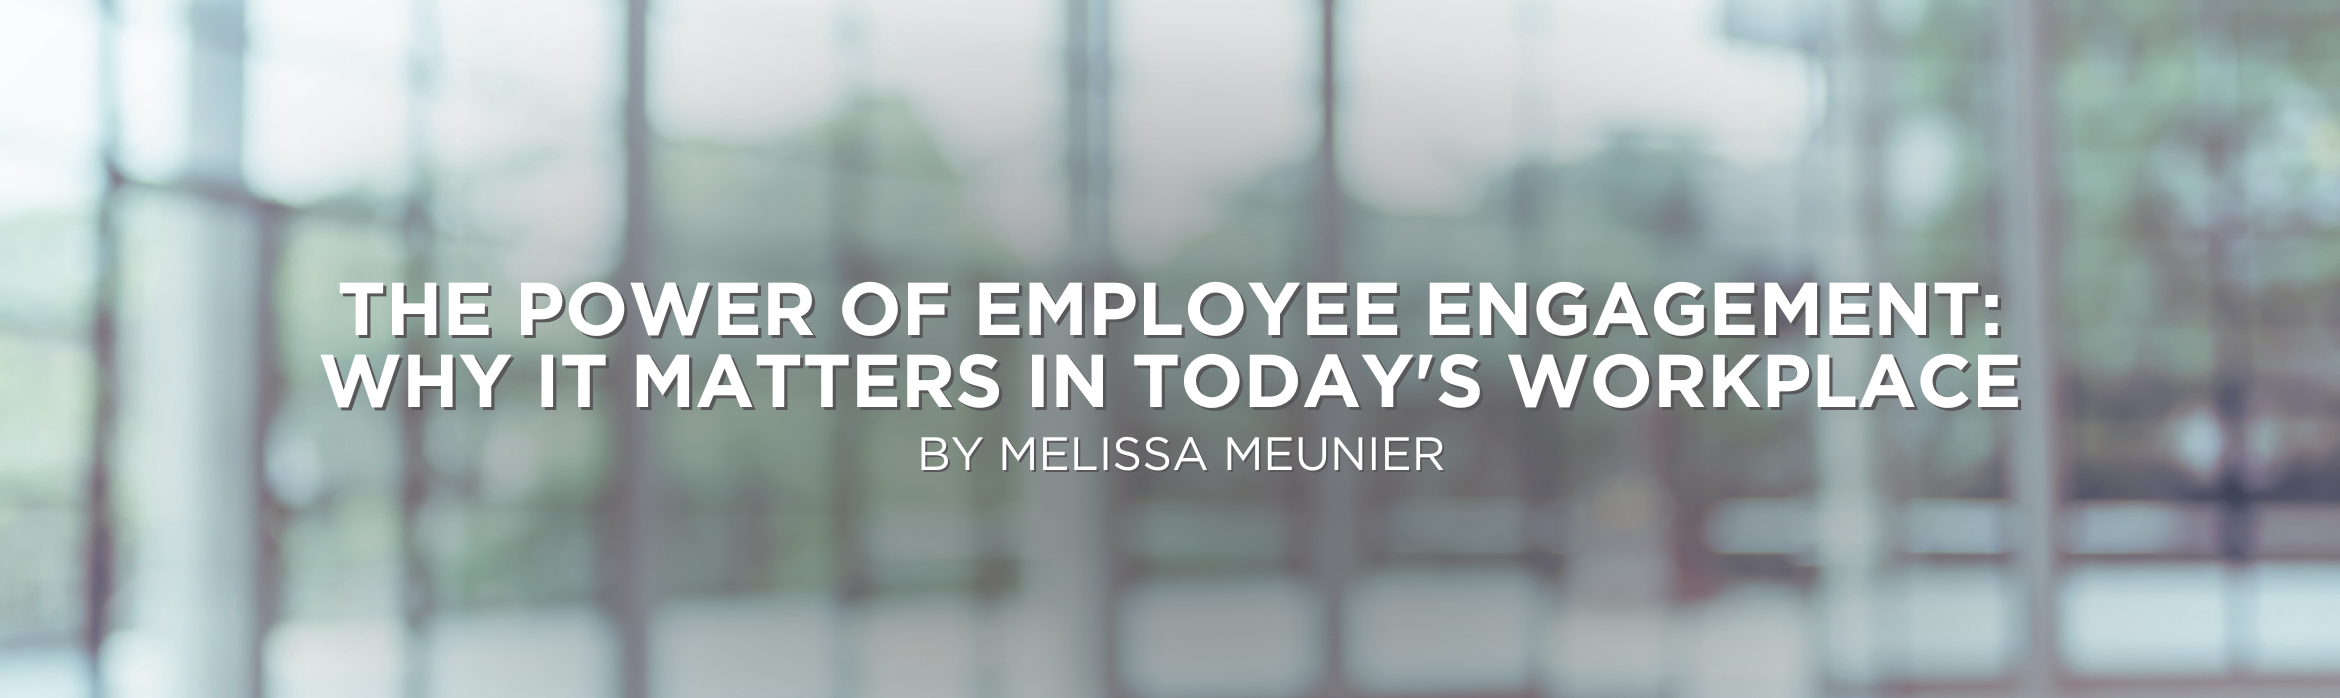 The Power of Employee Engagement: Why It Matters in Today's Workplace